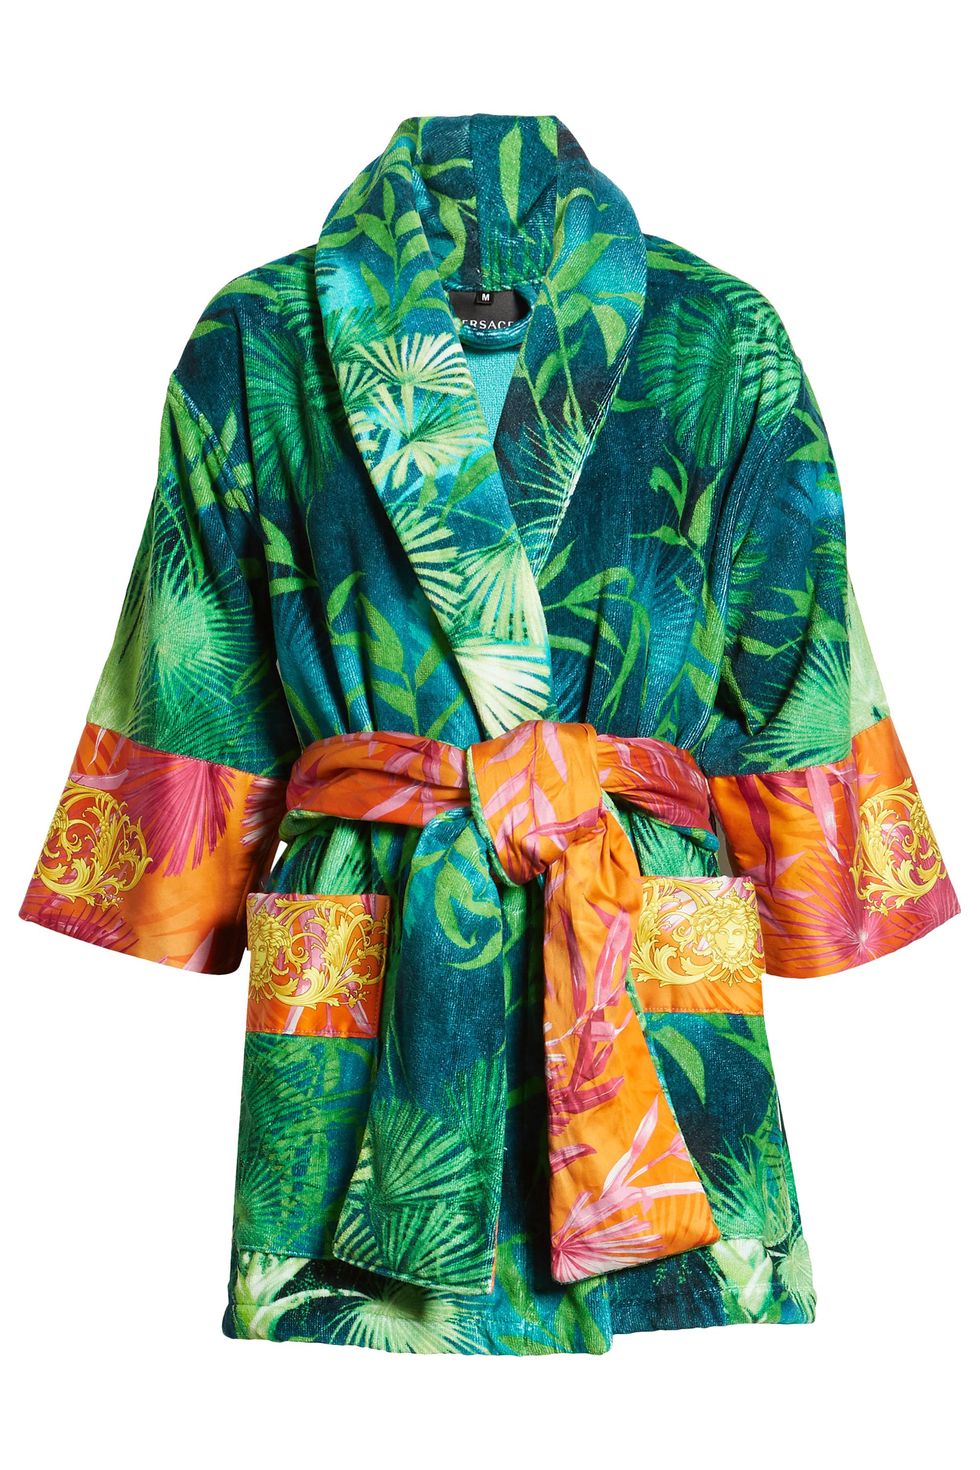 21 Best Robes for Women 2021- The Most Comfortable Robes That Make You  Forget Real Clothes Exist